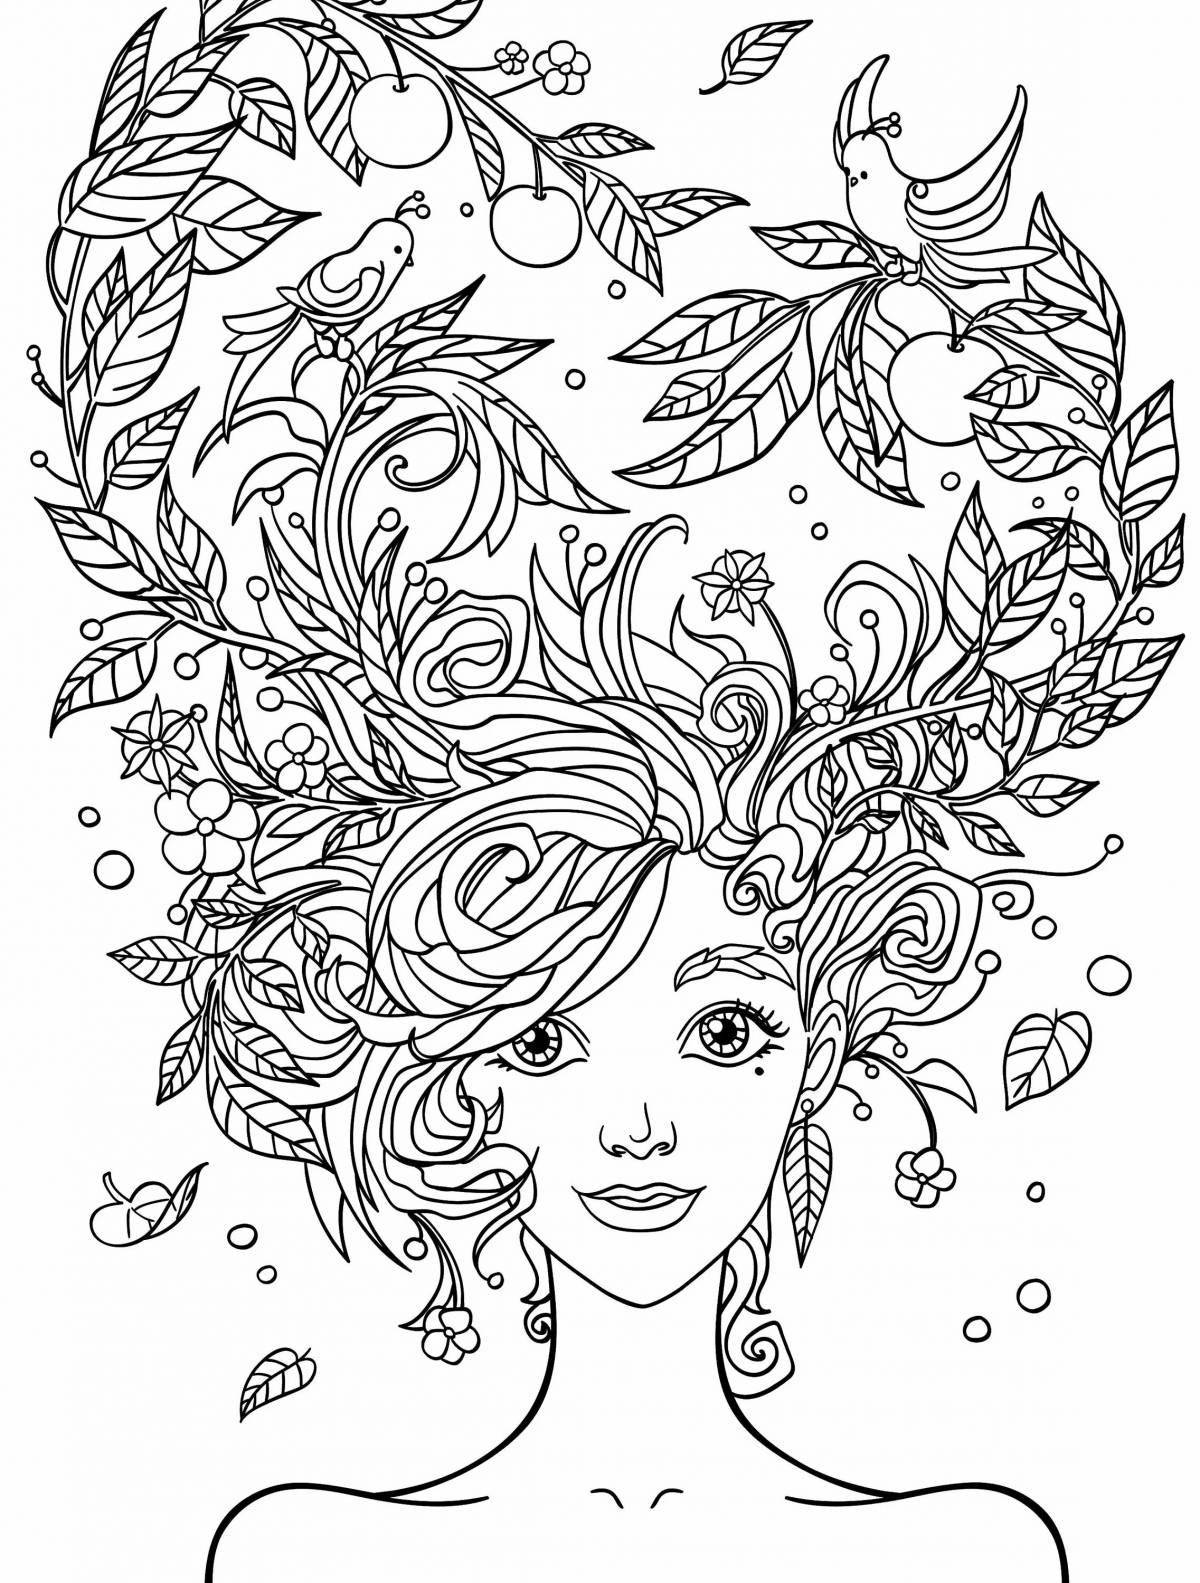 Comforting anti-stress coloring book for women